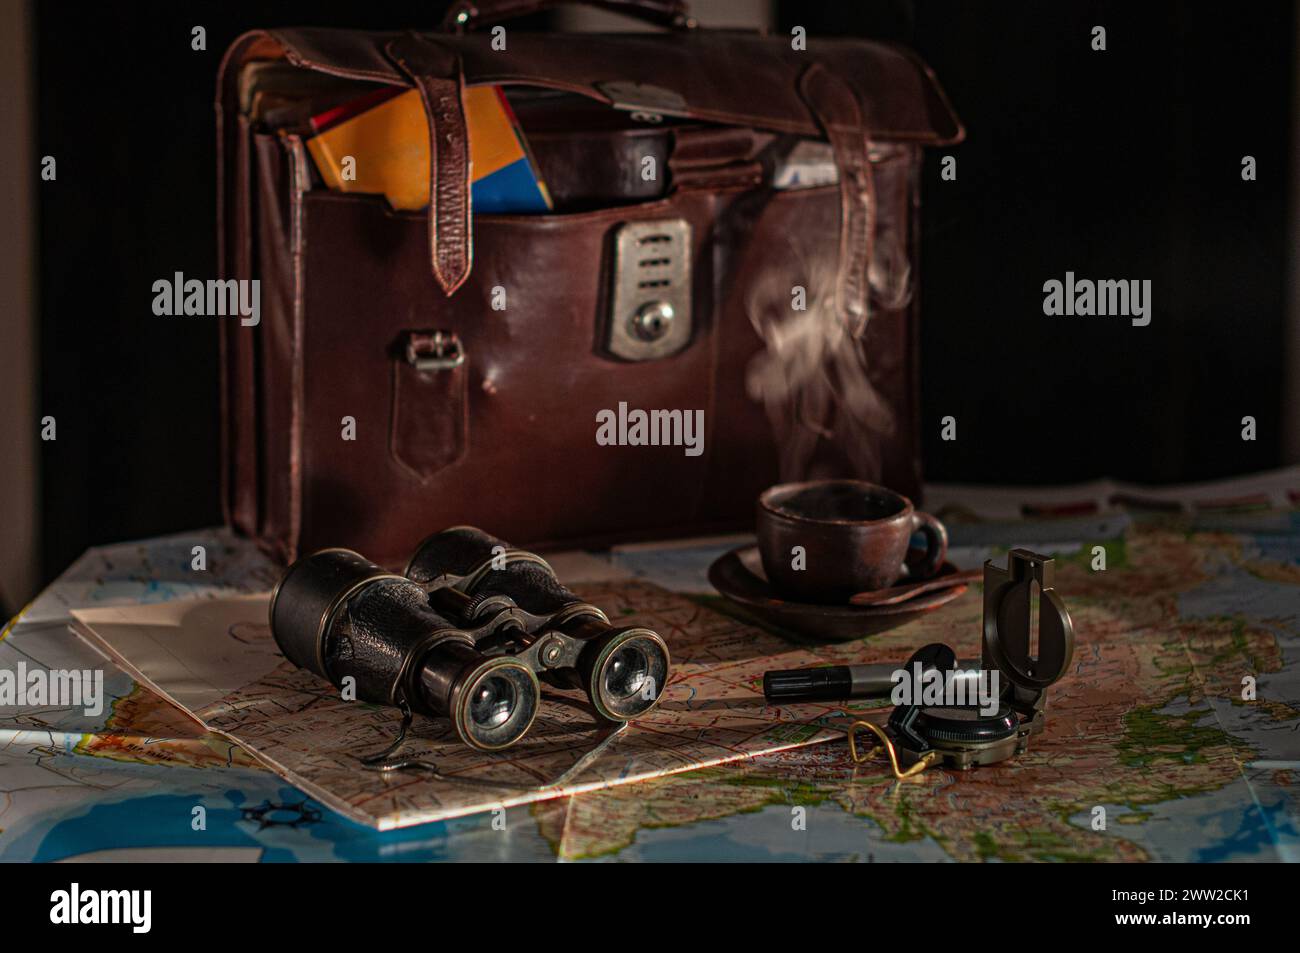 Check the list of travel necessities such as maps, compasses, stationery, bags and binoculars Stock Photo